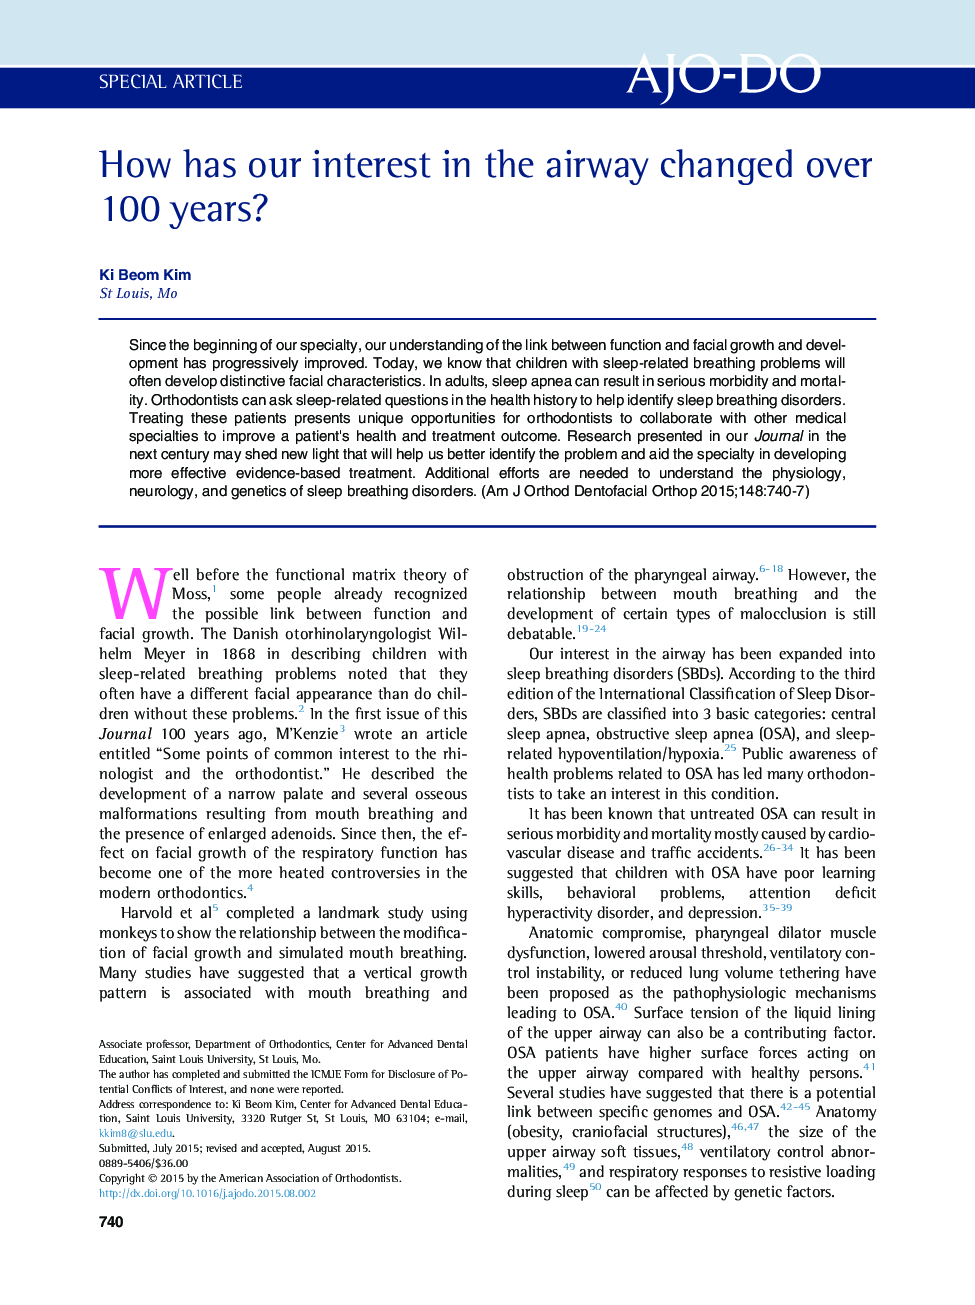 How has our interest in the airway changed over 100 years? 